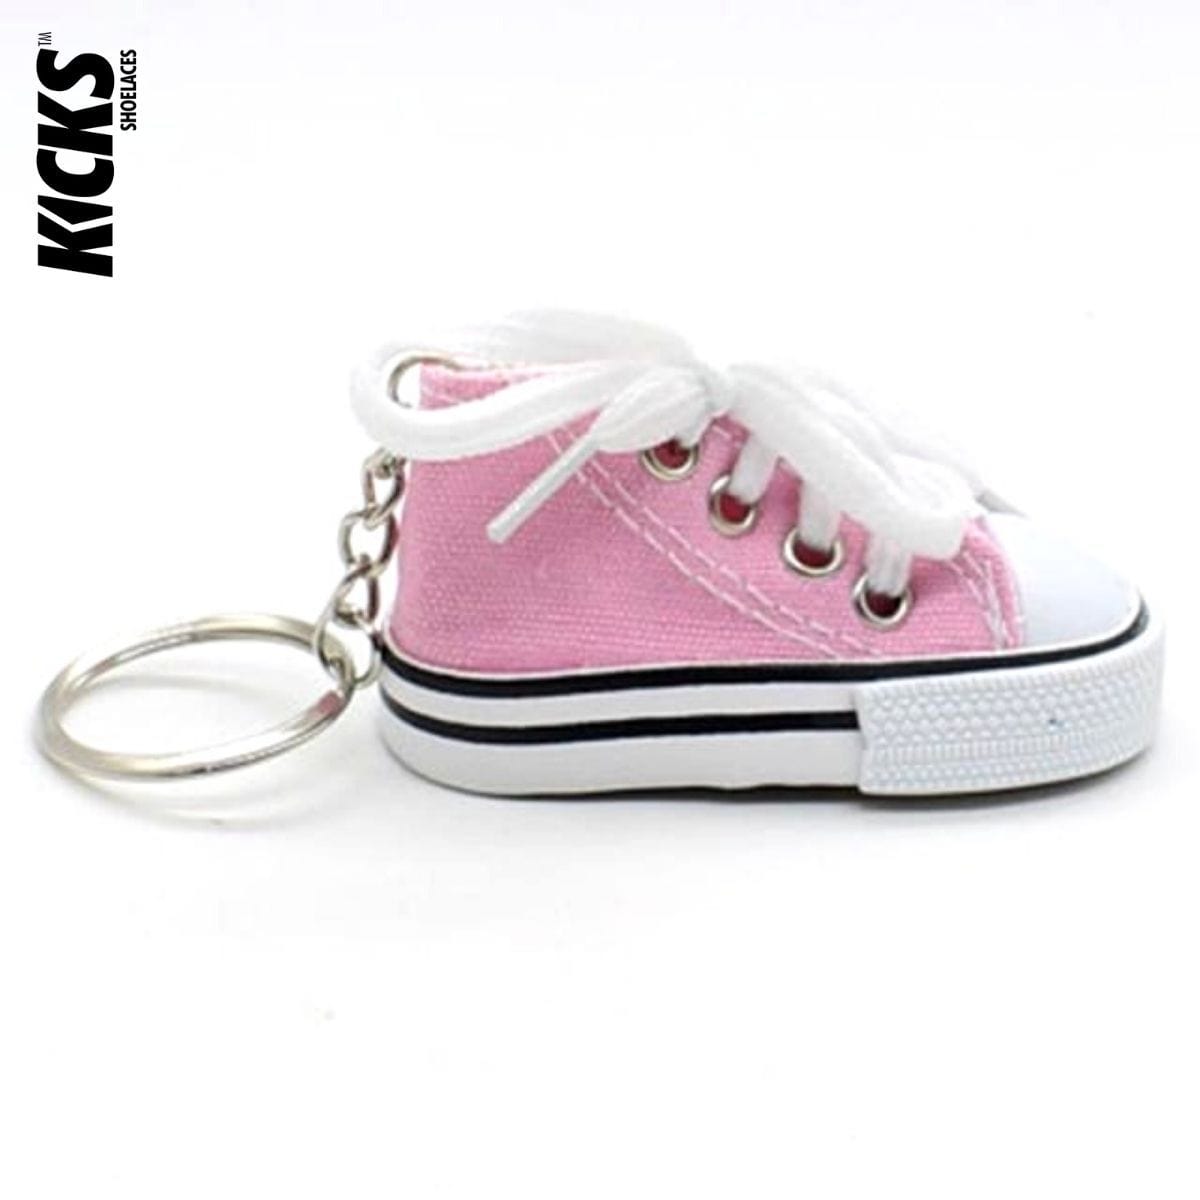 pink-high-top-sneaker-keychain-perfect-gift-best-charm-accessories.jpg